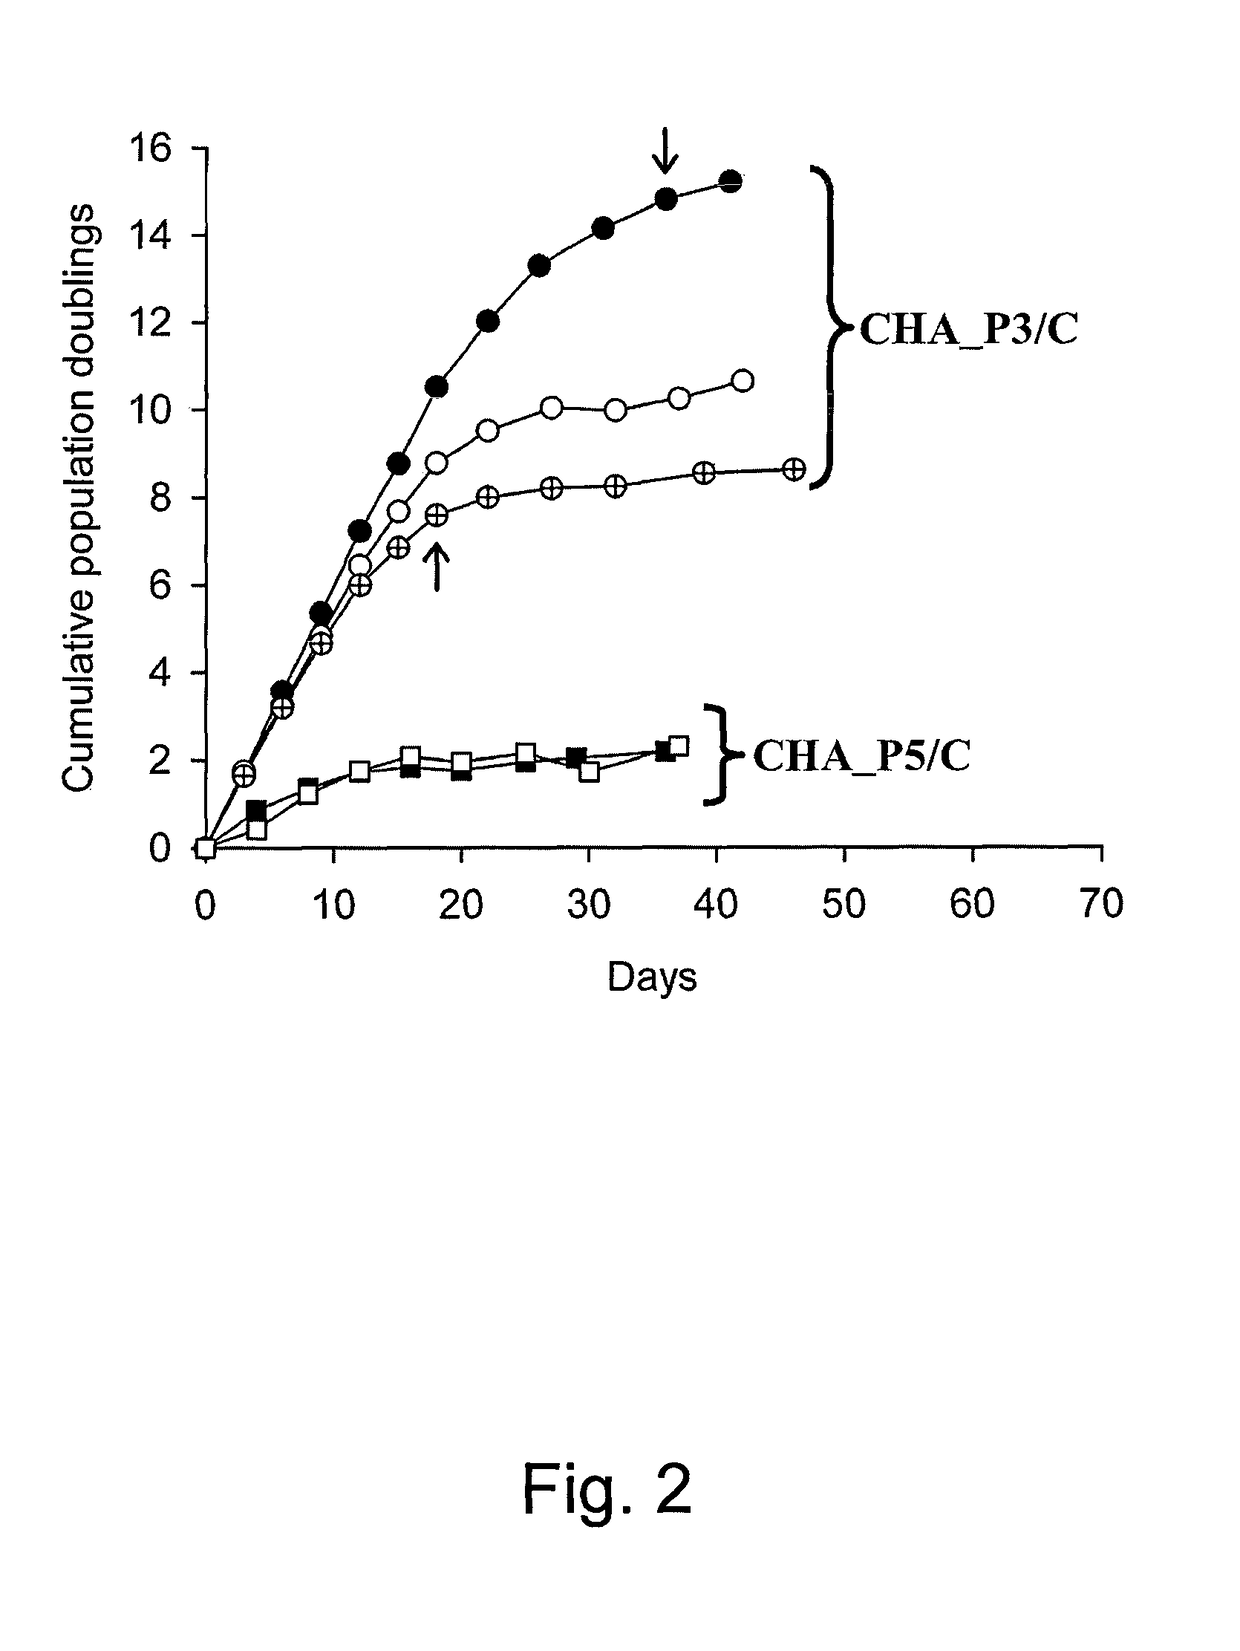 Method for preserving proliferation and differentiation potential of mesenchymal stem cells